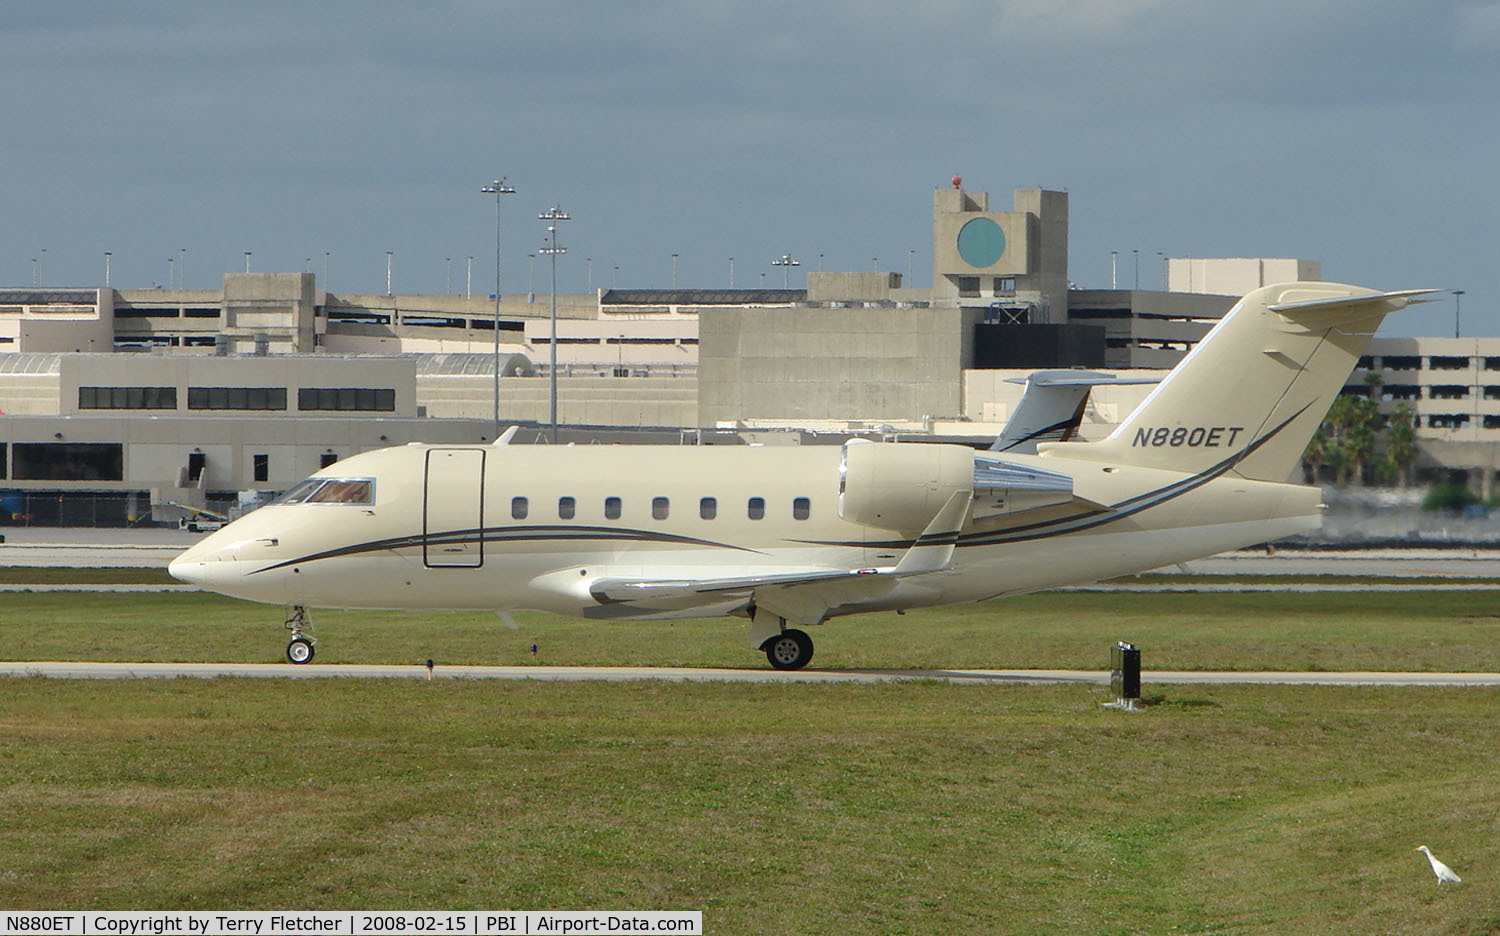 N880ET, 2001 Bombardier Challenger 604 (CL-600-2B16) C/N 5514, The business aircraft traffic at West Palm Beach on the Friday before President's Day always provides the aviation enthusiast / photographer with a treat